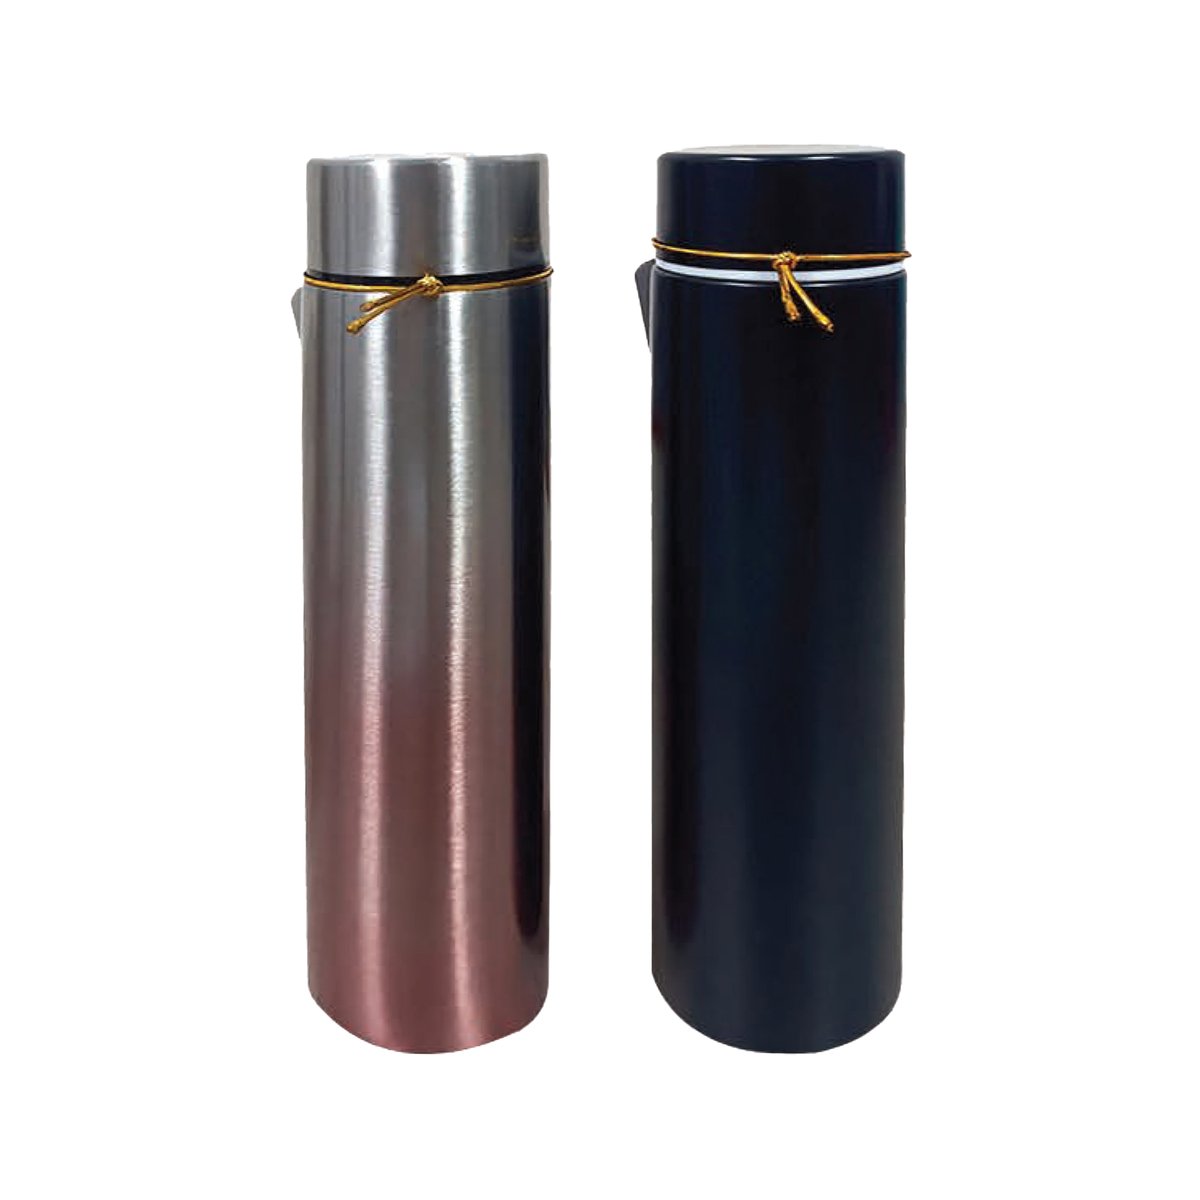 Speed Stainless Steel Double Wall Flask Slim 0.2Ltr MK23/1C Assorted Colors